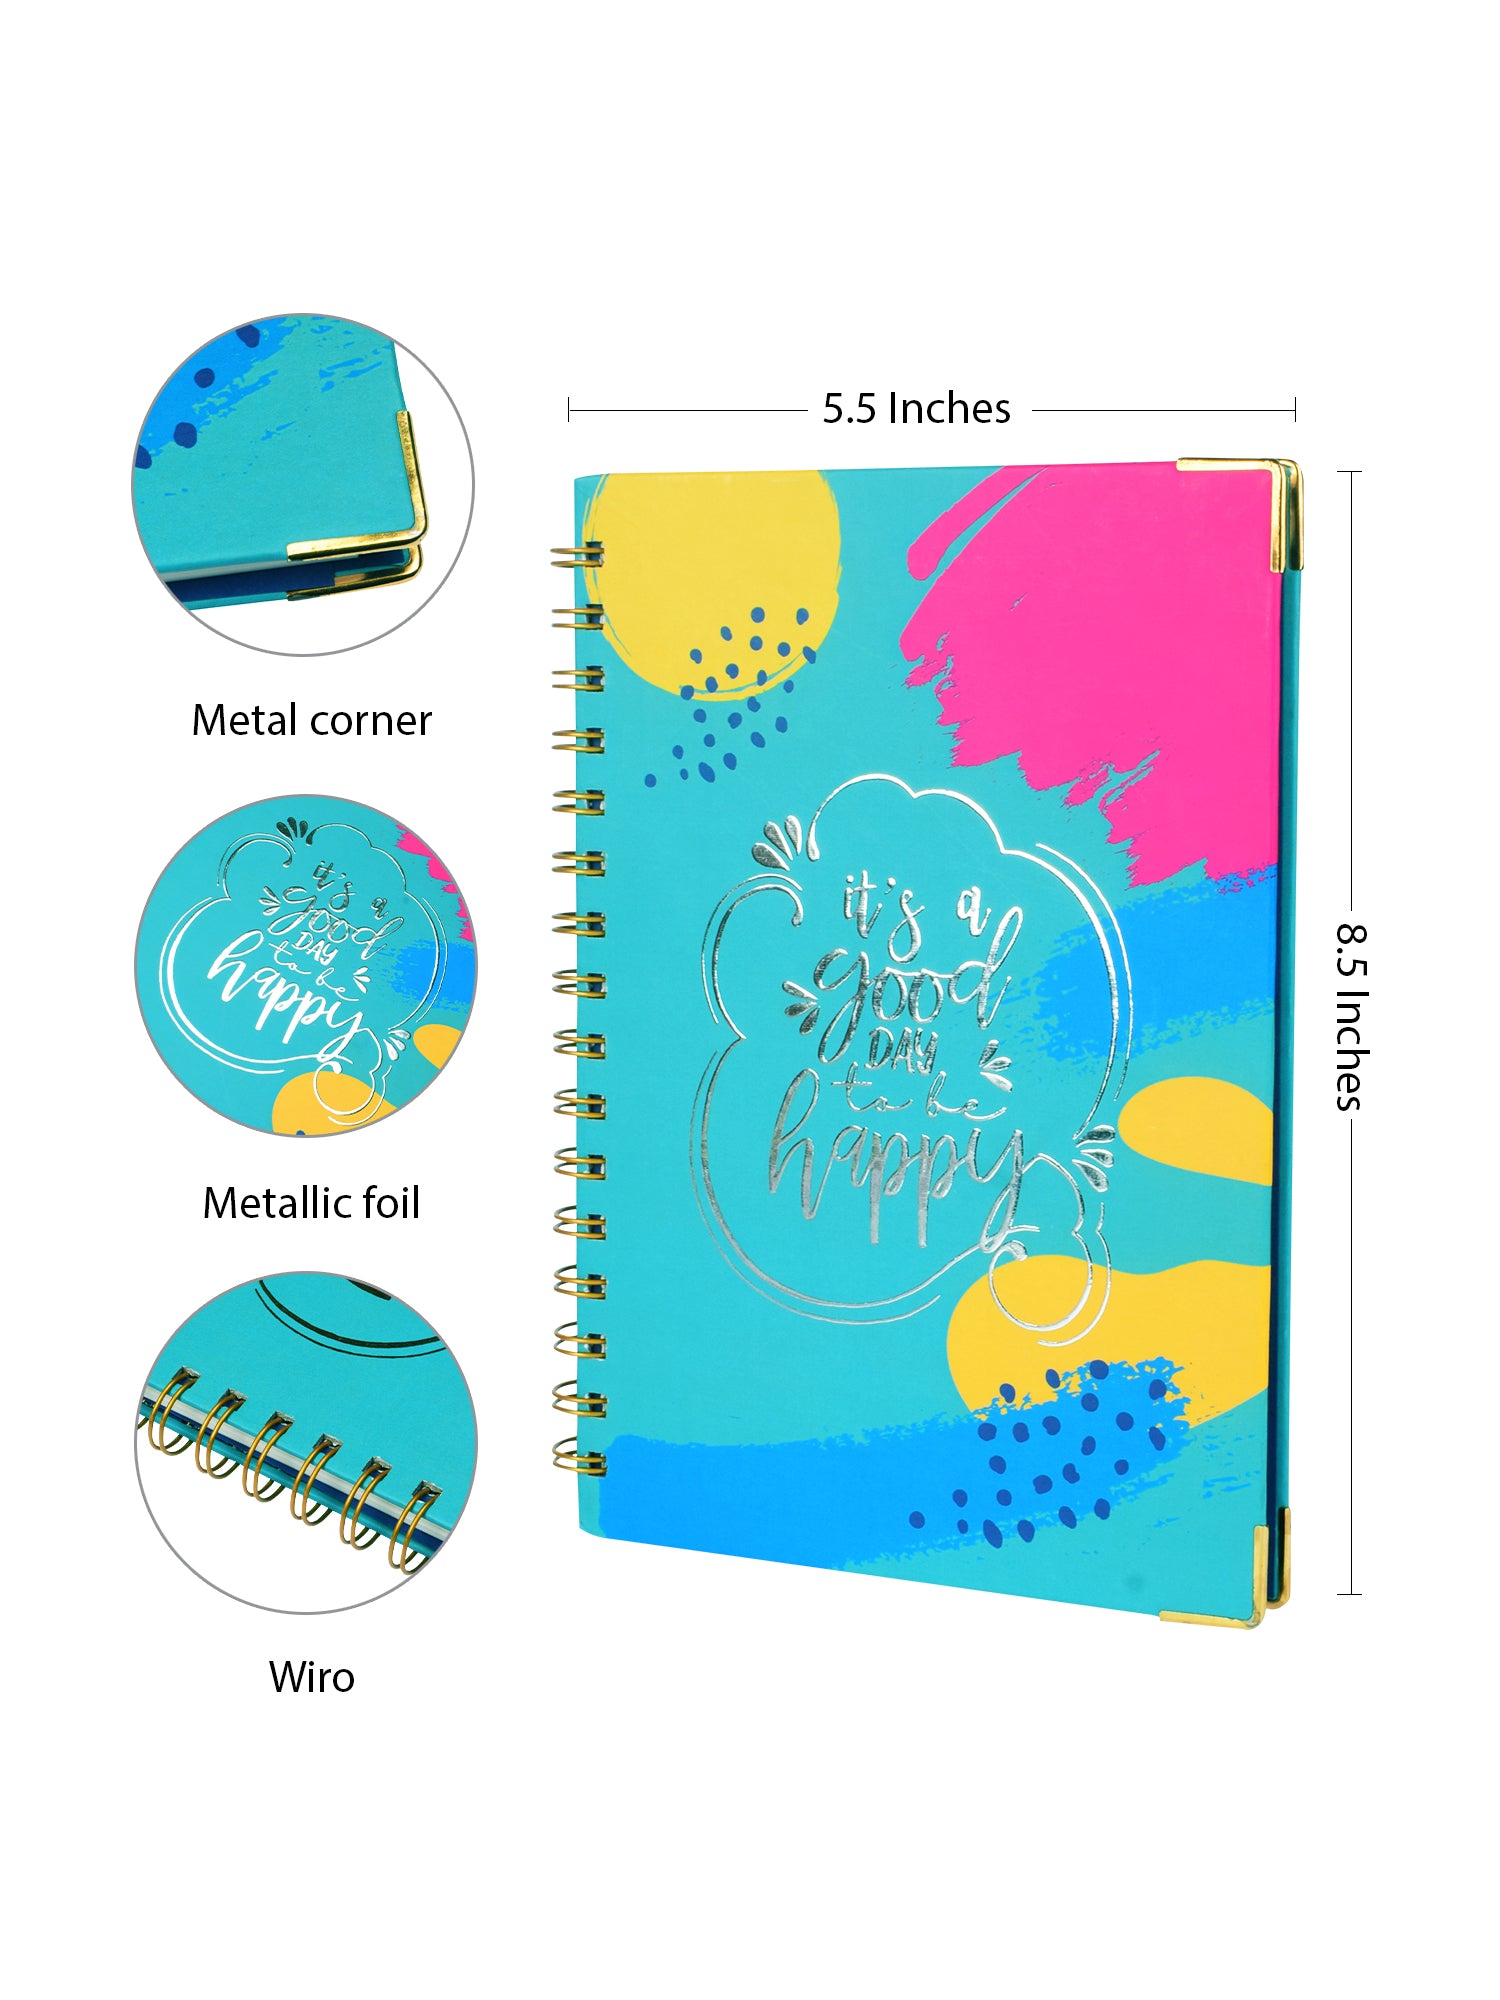 Happy Day - Blue - Daily Planner